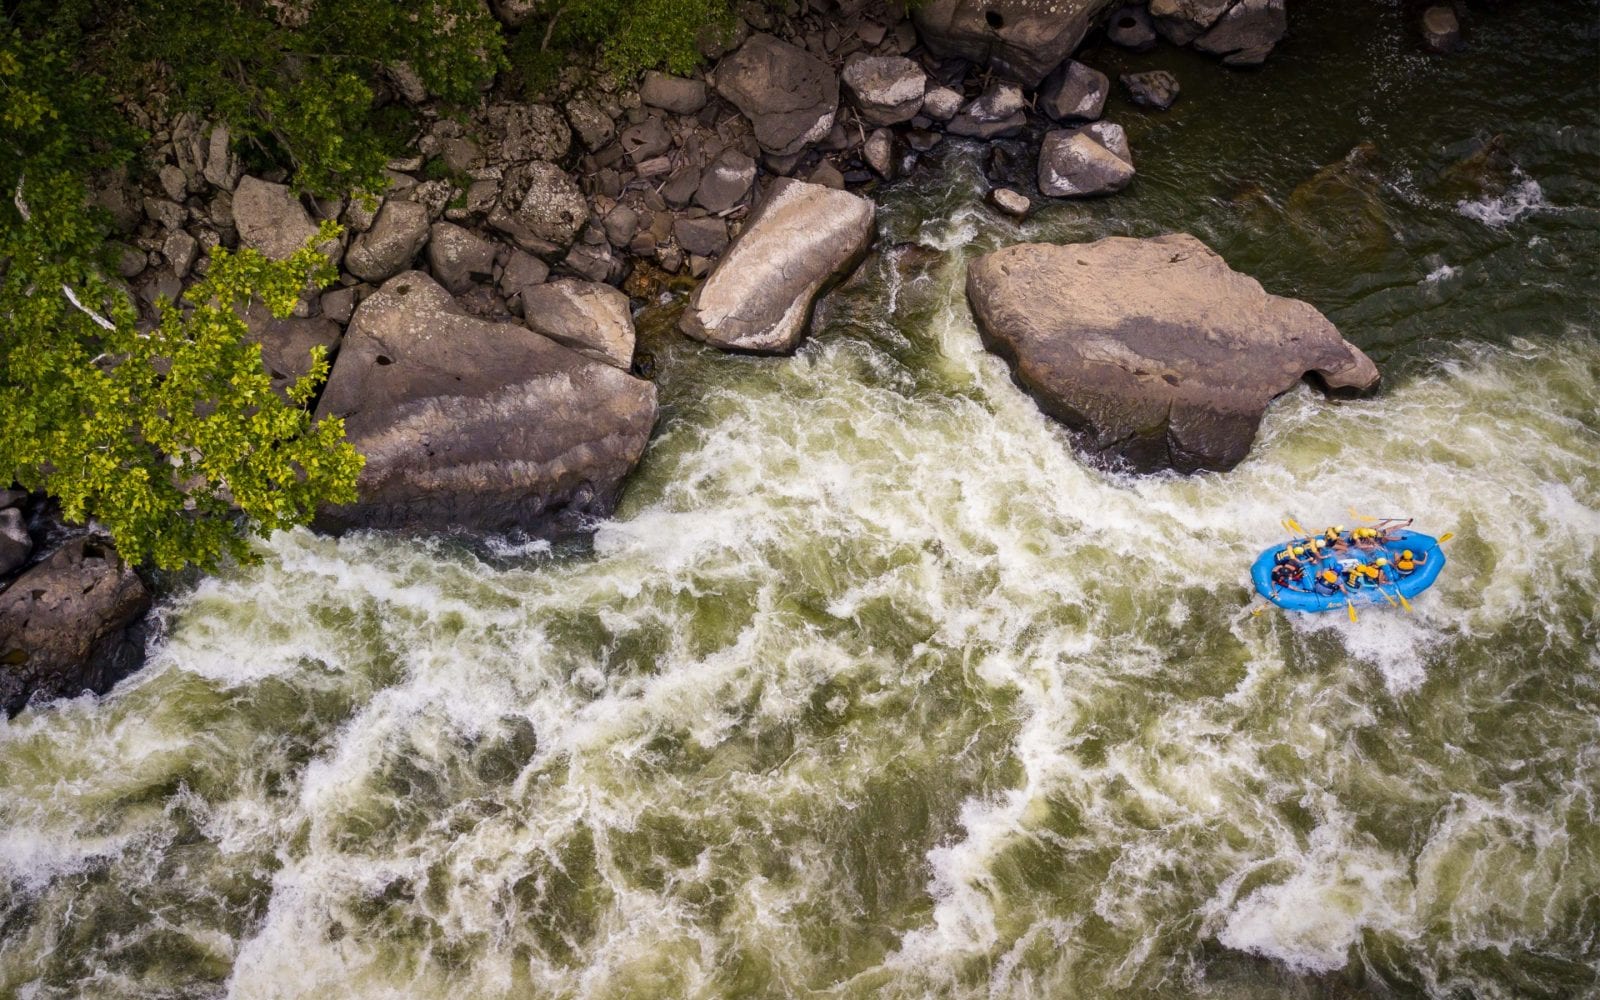 A west virginia whitewater rafting rafting aerial shot of a blue boat running Lower Keeney rapid.